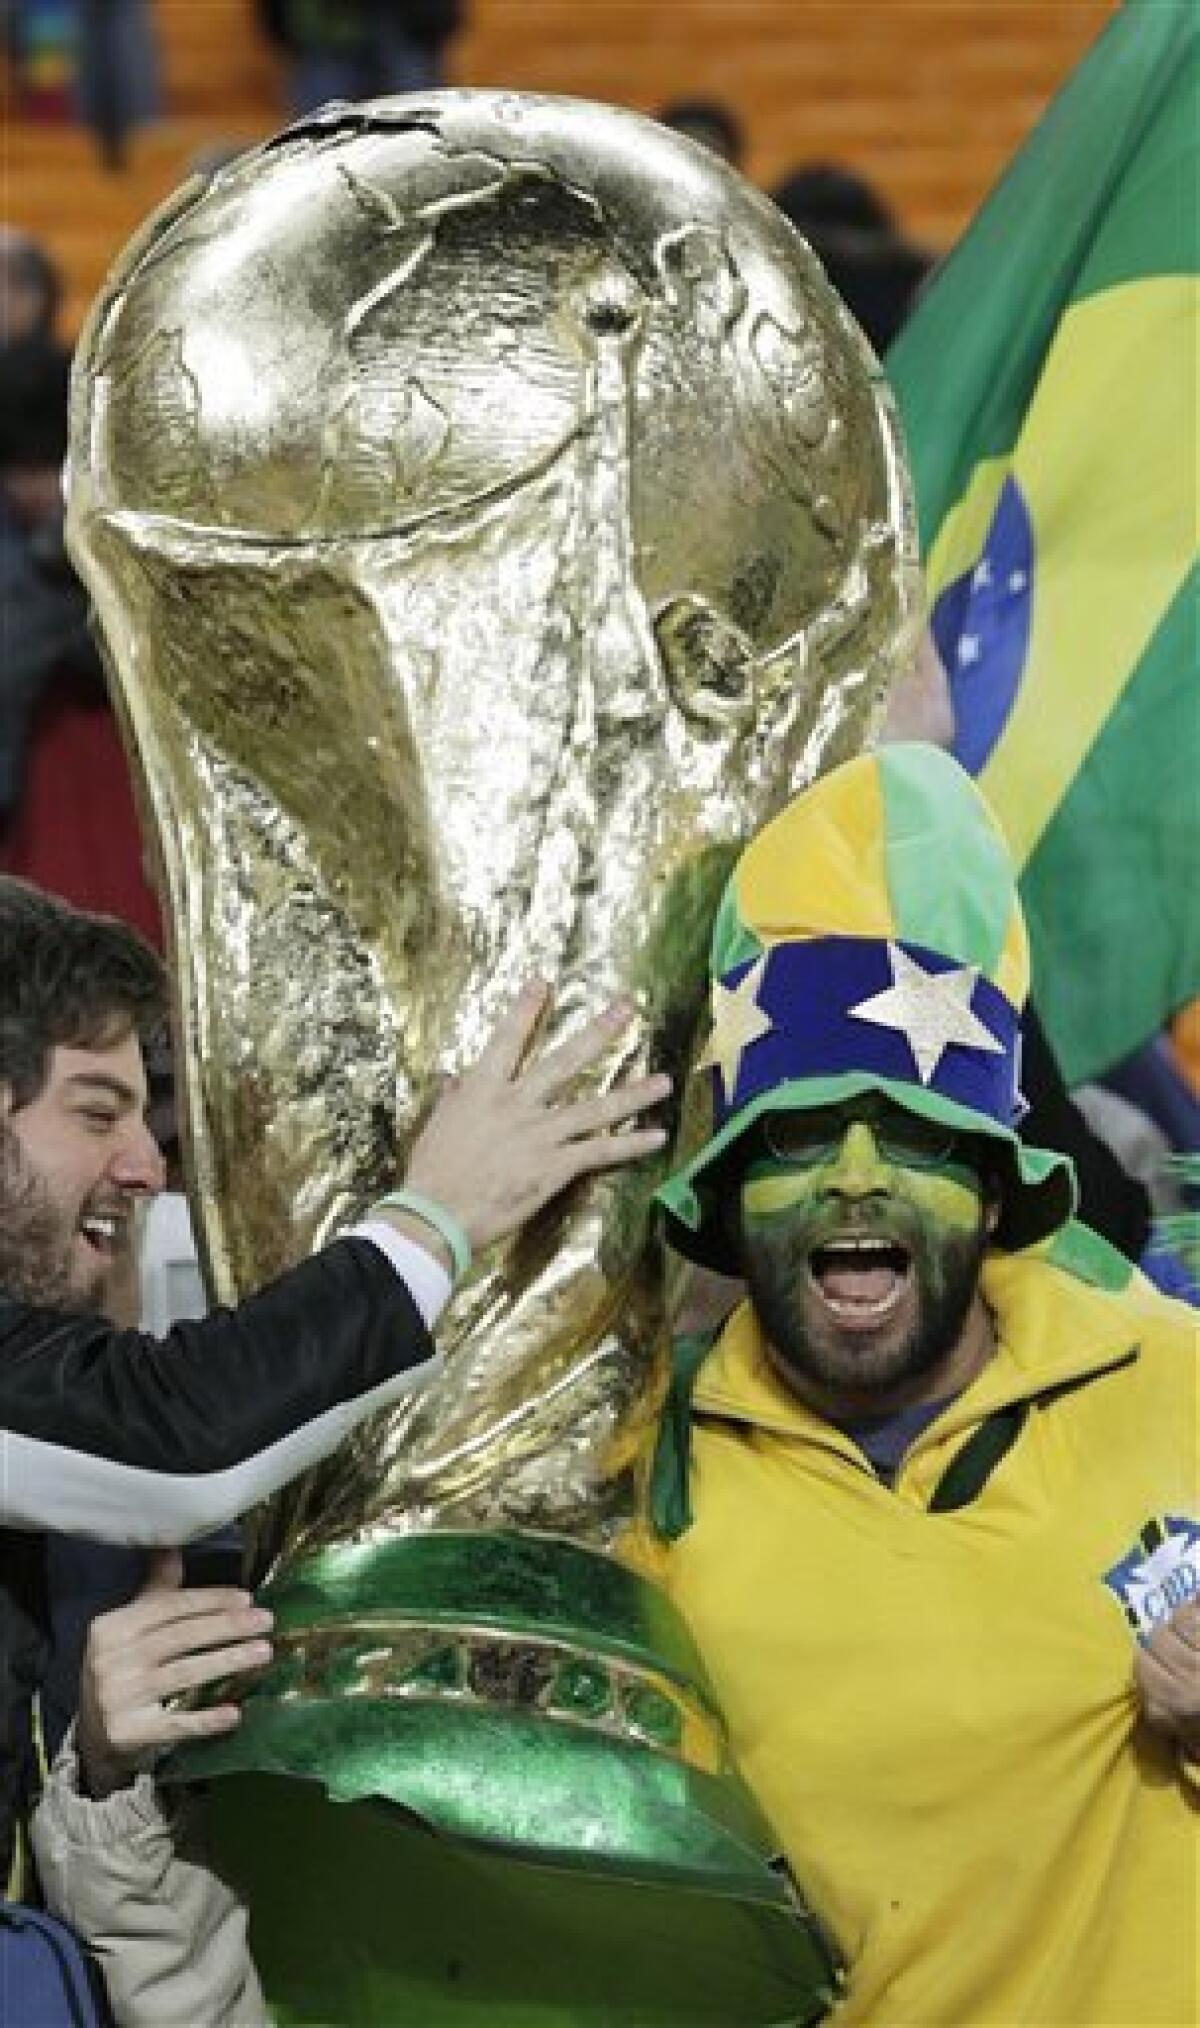 Brazil fans celebrate with a giant mock World Cup trophy after the World Cup group G soccer match between Brazil and Ivory Coast at Soccer City in Johannesburg, South Africa, Sunday, June 20, 2010. Brazil won 3-1. (AP Photo/Frank Augstein)